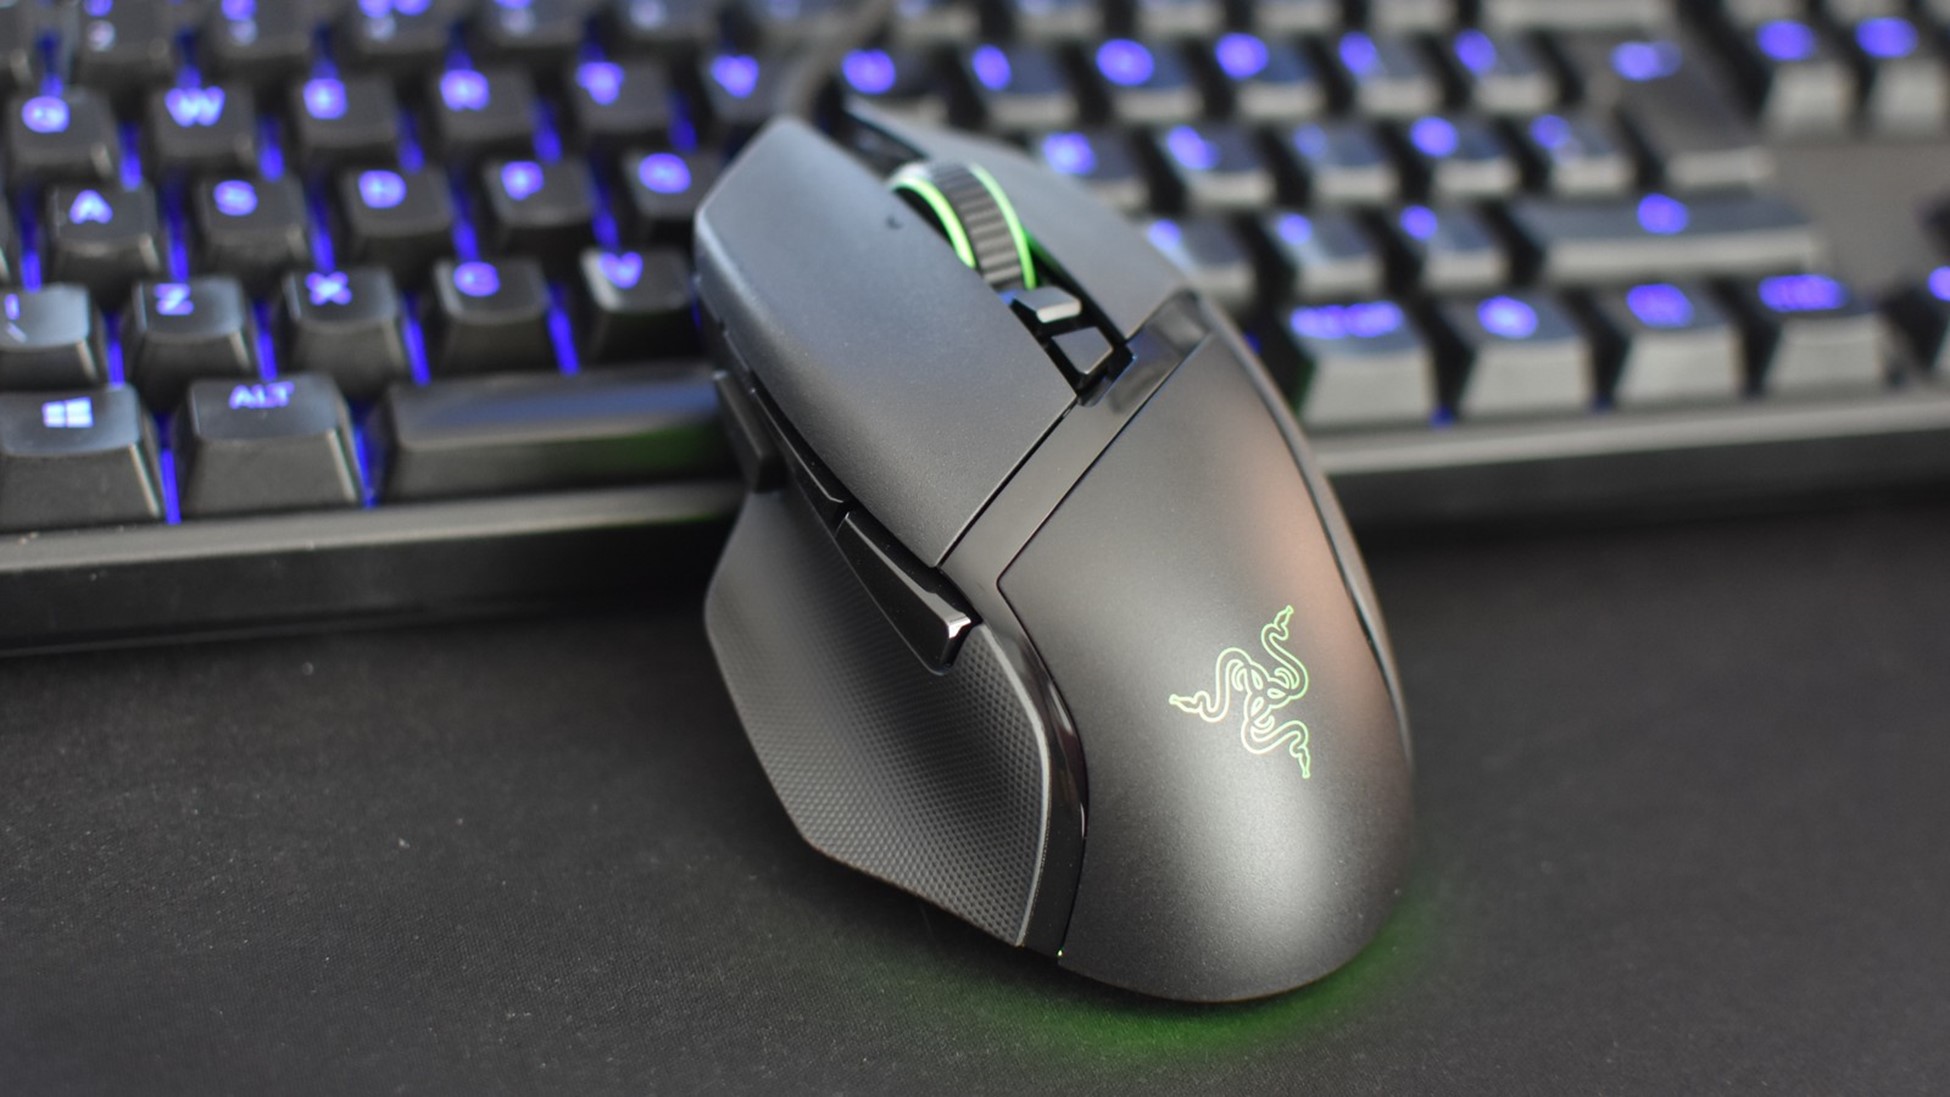 Leading Gaming Mouse